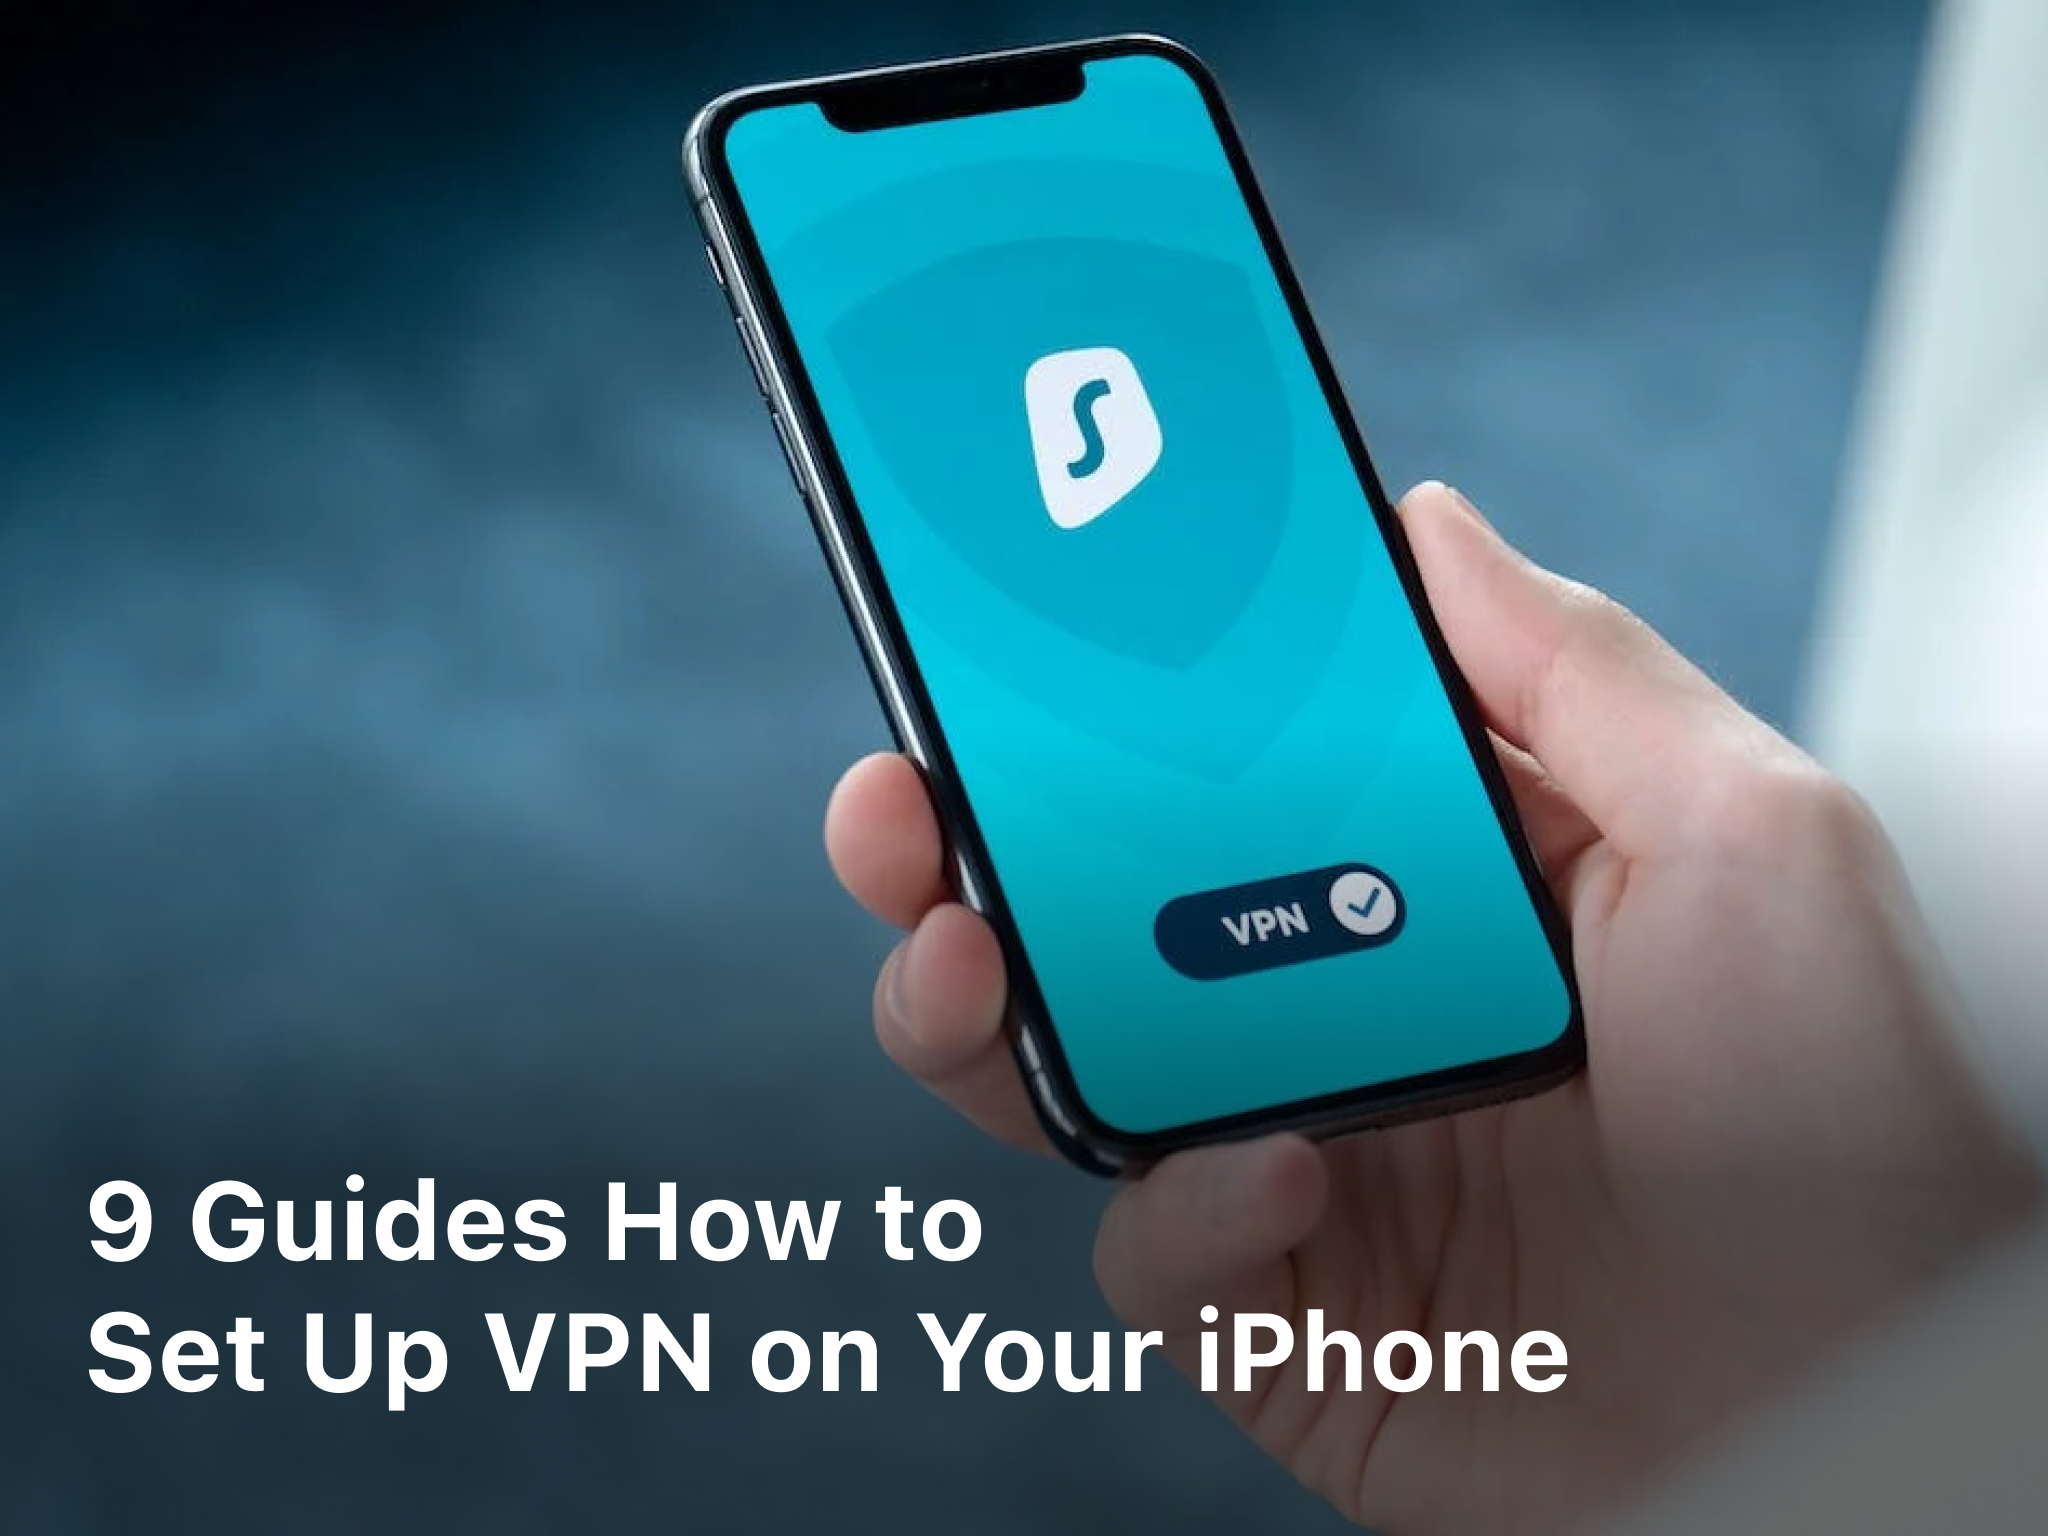 How to set up VPN on your iPhone